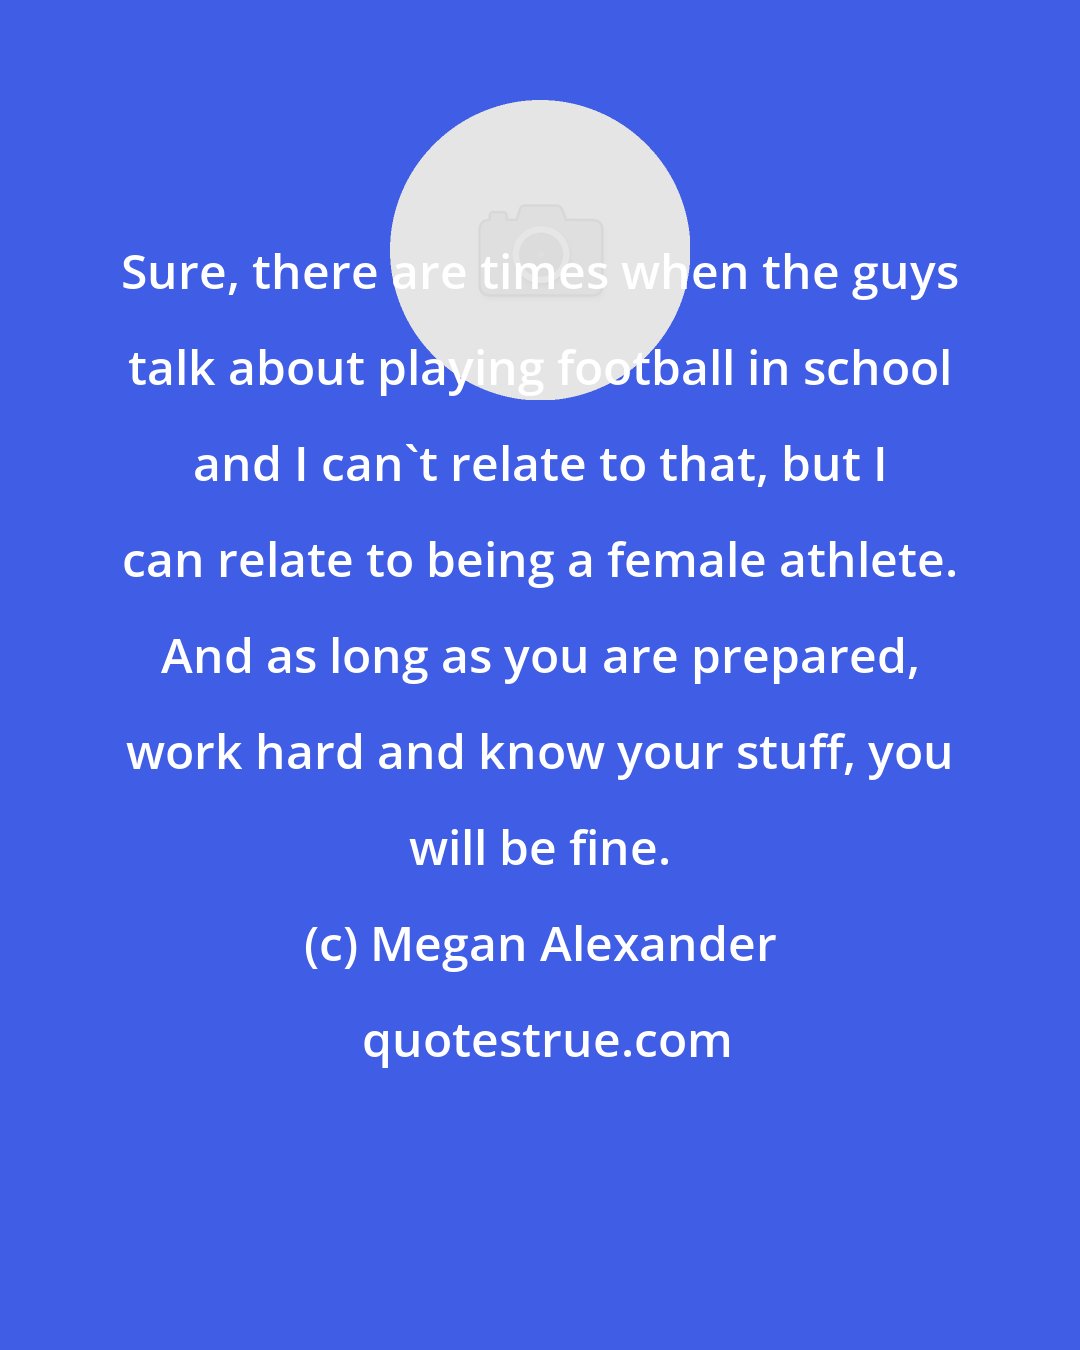 Megan Alexander: Sure, there are times when the guys talk about playing football in school and I can't relate to that, but I can relate to being a female athlete. And as long as you are prepared, work hard and know your stuff, you will be fine.